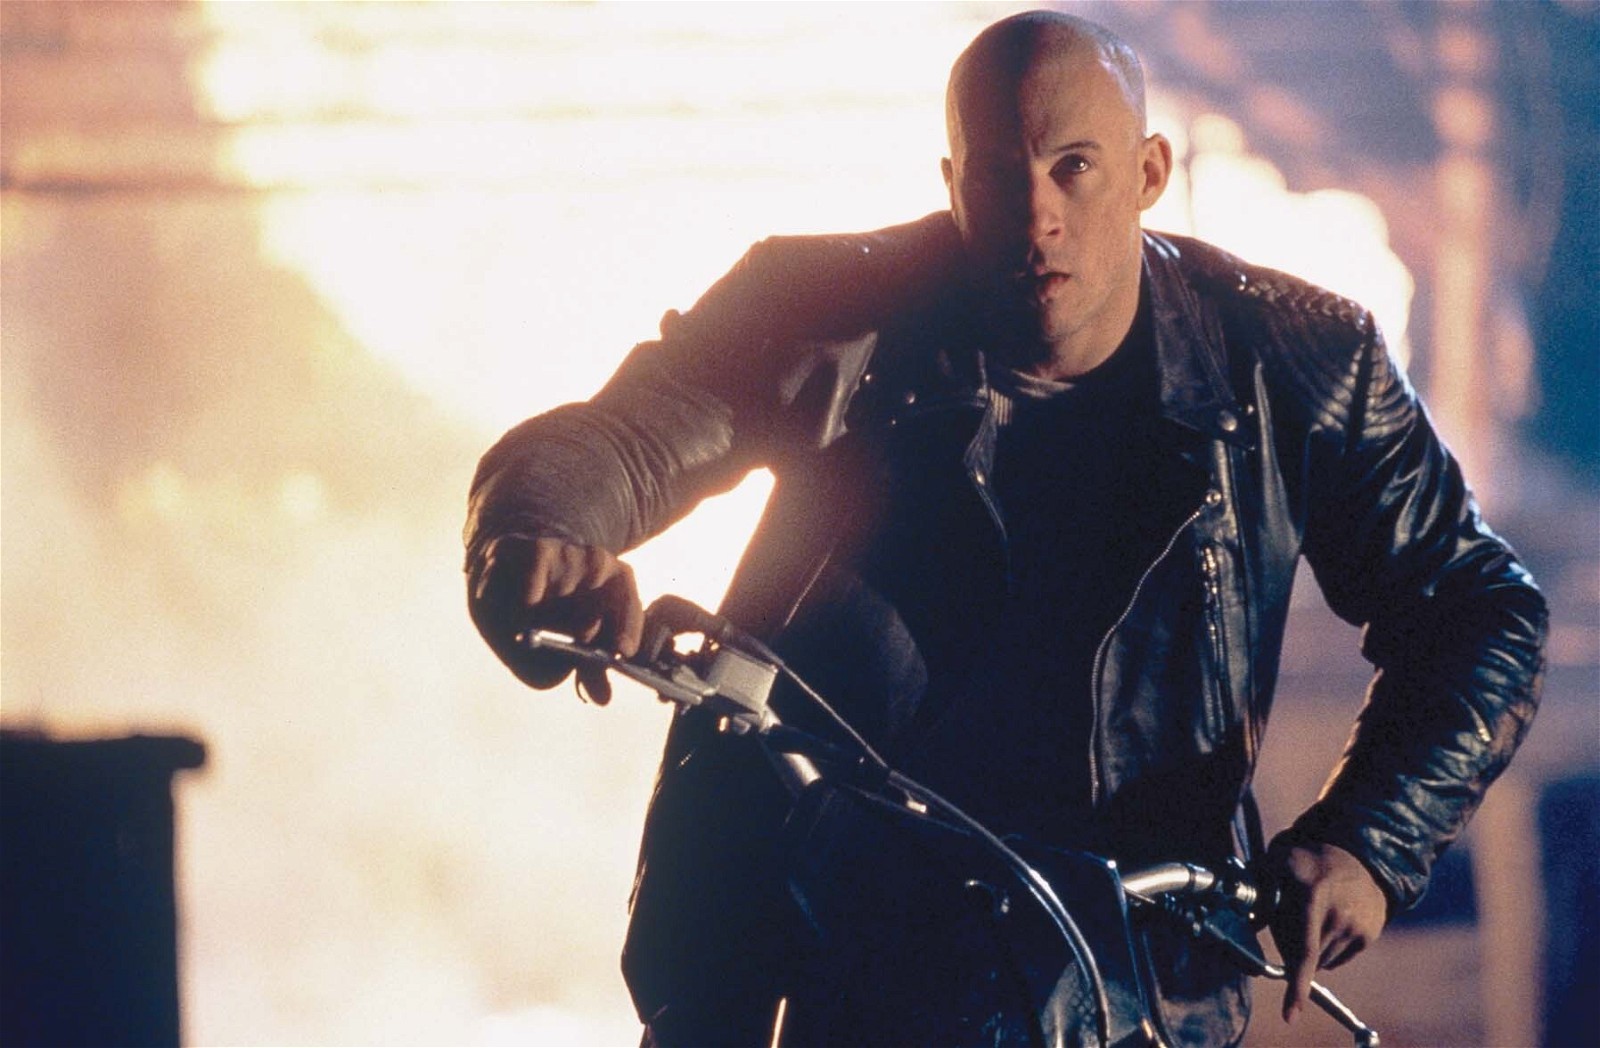 2002's XXX spawned a new franchise for Vin Diesel | Sony Pictures Releasing